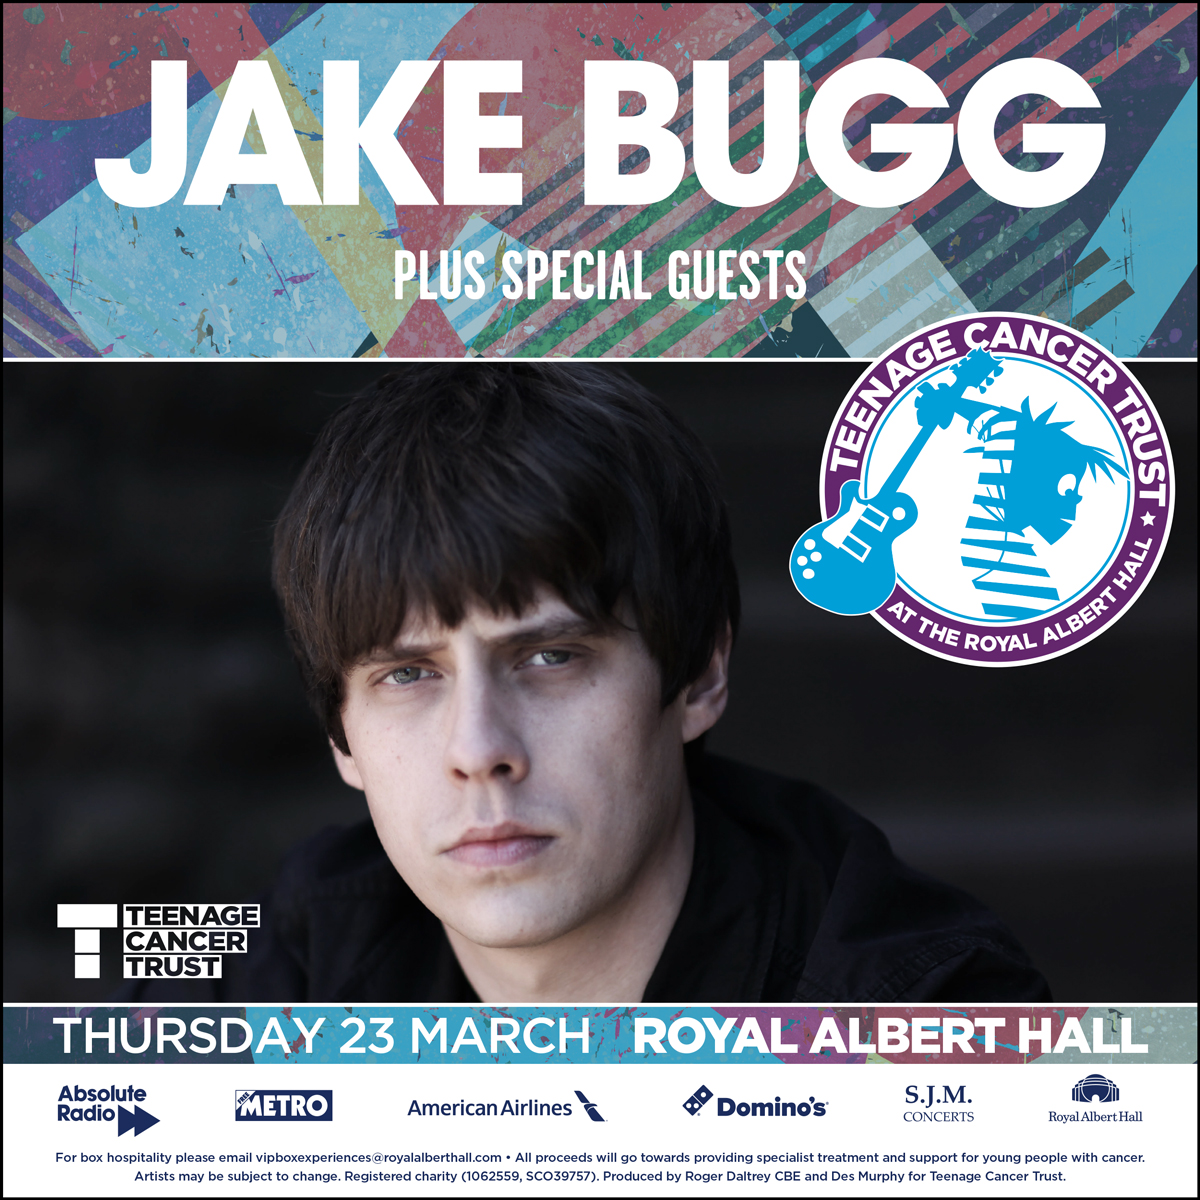 Looking forward to playing a special show on 23 March at the Royal Albert Hall for @TeenageCancer's #TeenageCancerGigs. Tickets on sale from 9:30am on Friday at sjm.lnk.to/TCT.